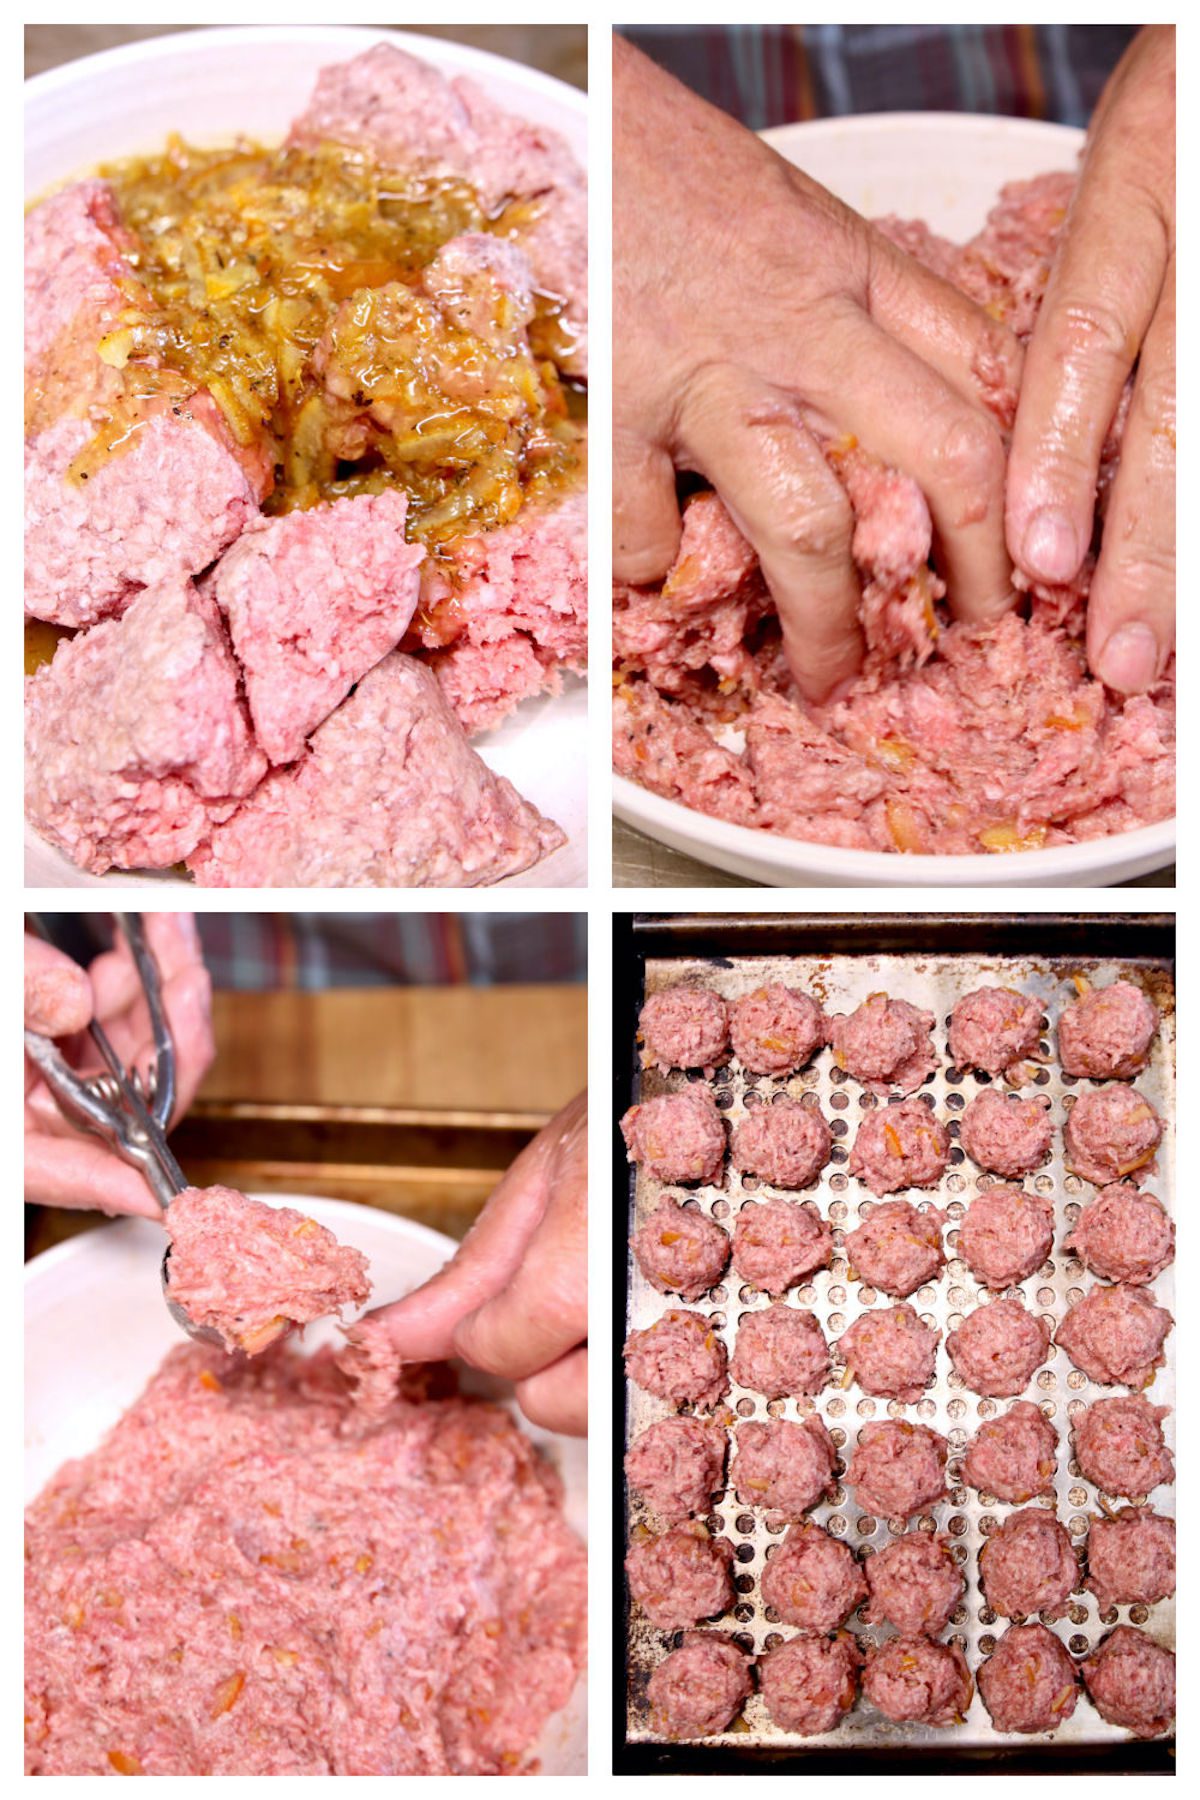 making meatballs collage: mixing meat, forming into meatballs, on a grill pan